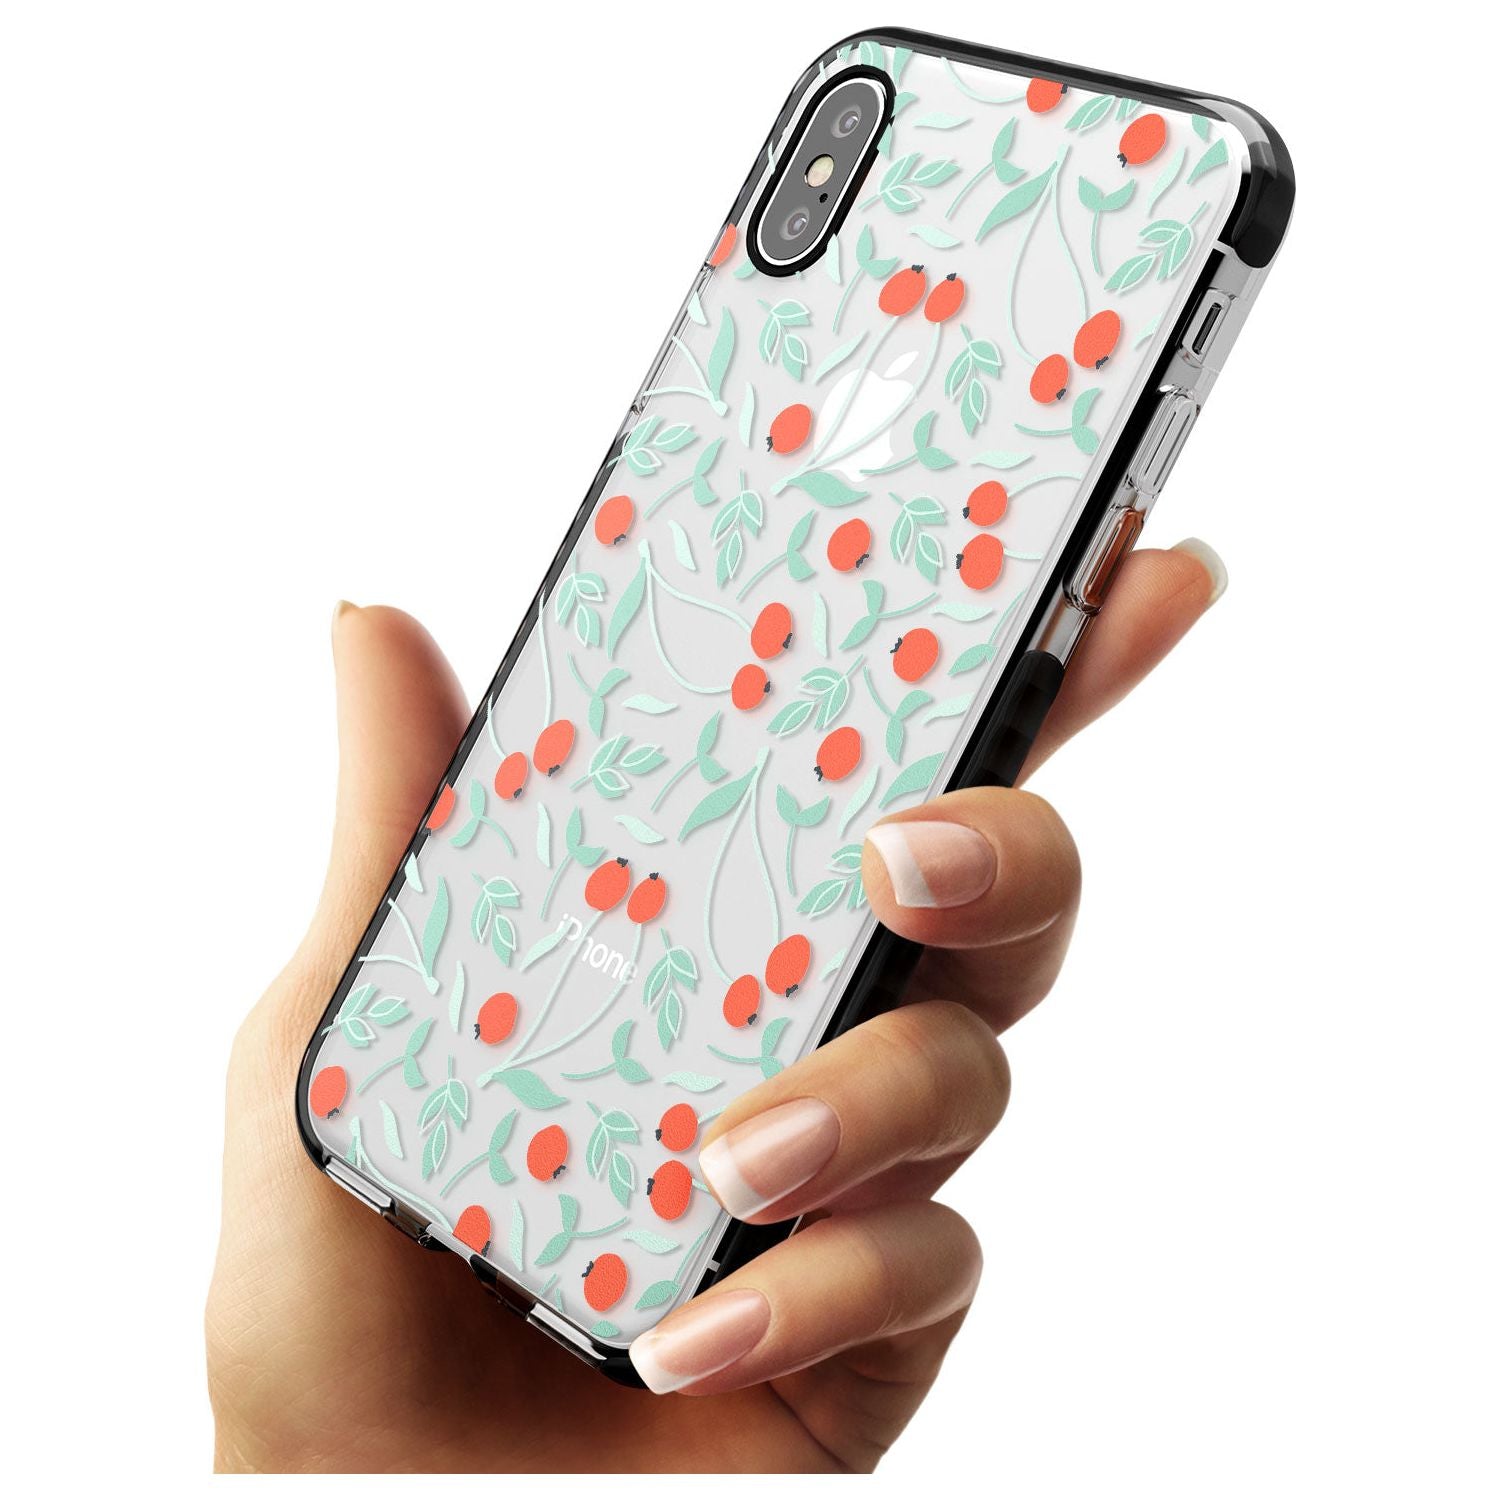 Red Berries Transparent Floral Black Impact Phone Case for iPhone X XS Max XR